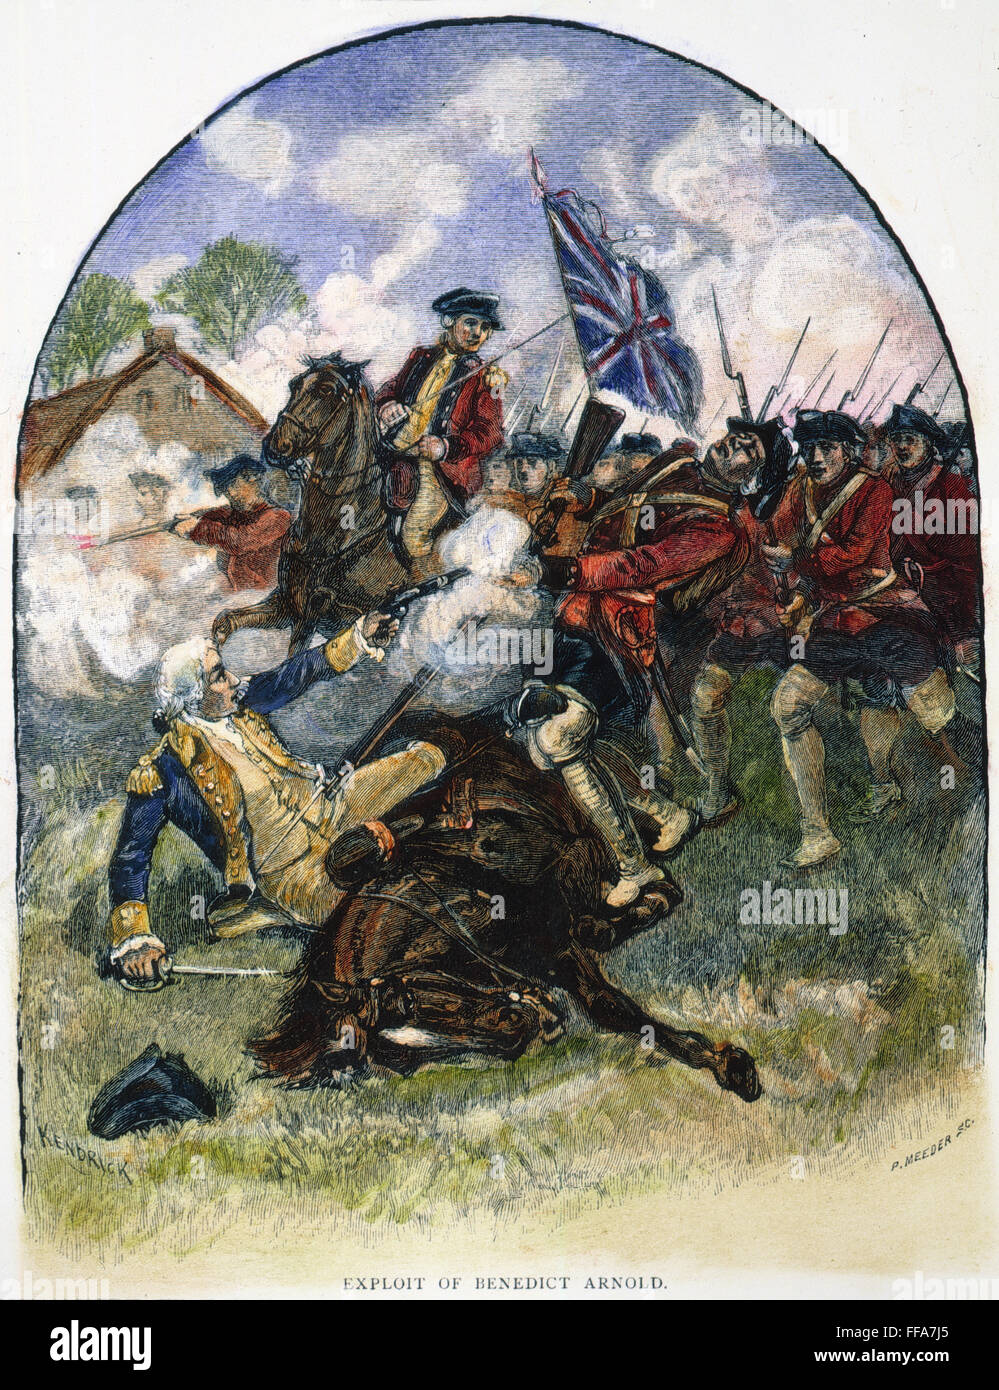 BENEDICT ARNOLD WOUNDED. /nMajor General Arnold defending himself after being wounded and falling from his horse at the Second Battle of Saratoga on 7 October 1777. Colored engraving, 19th century. Stock Photo